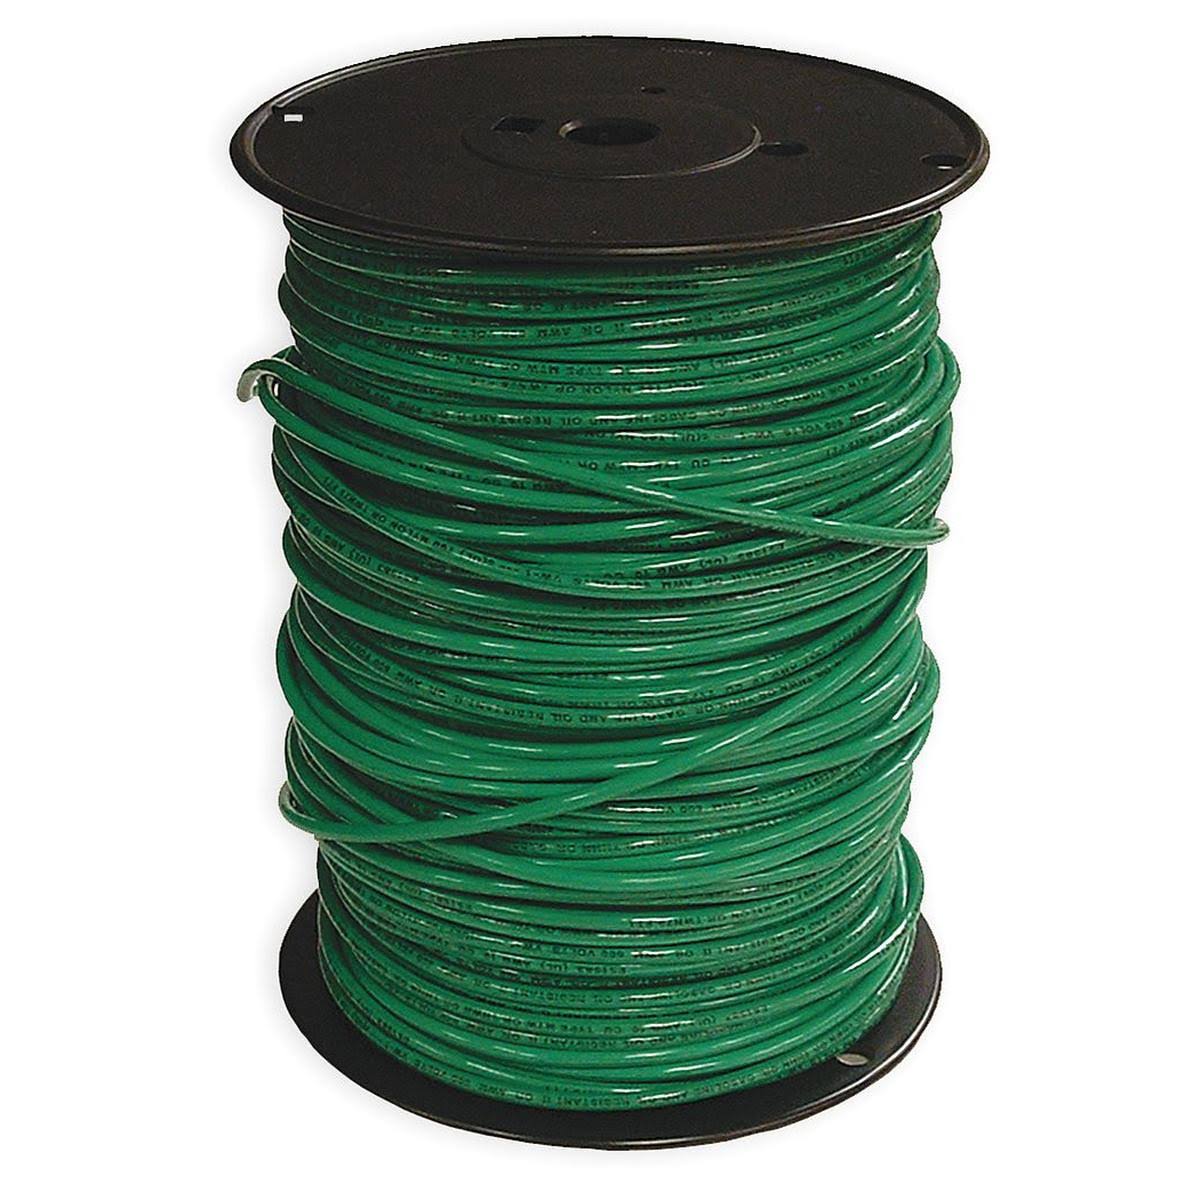 Southwire 22977301 Building Wire,THHN,10 AWG,Green,500ft